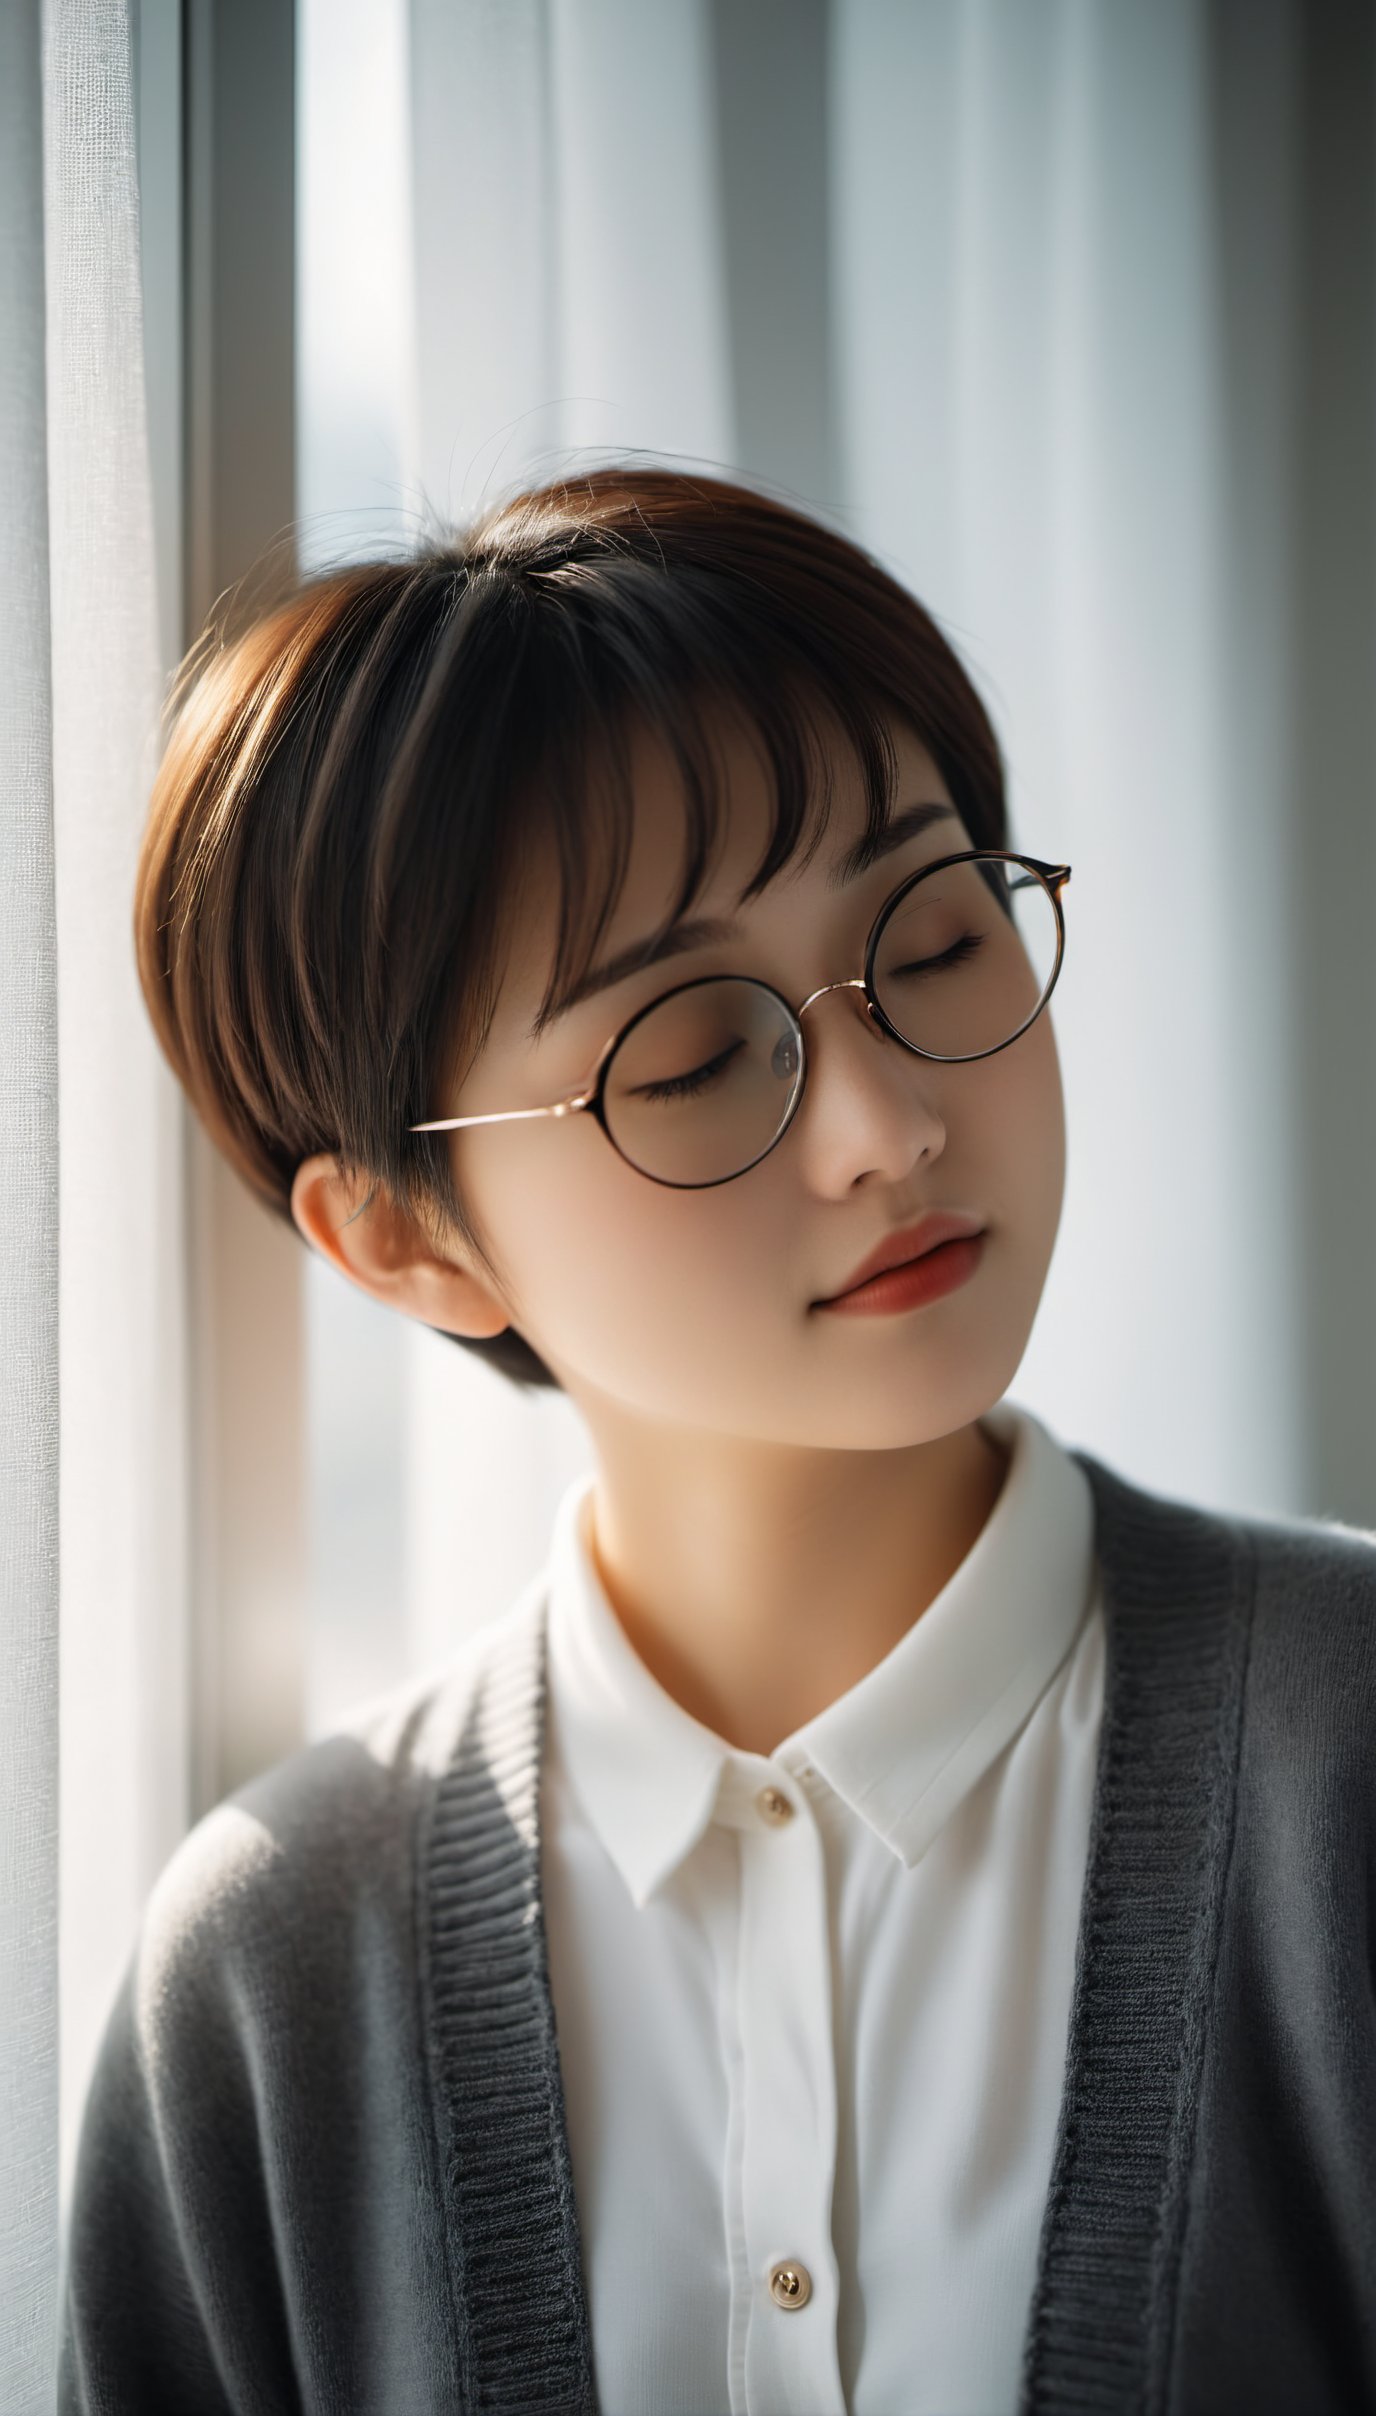 cinematic photo A short hair 18yo Chinese woman wearing a white shirt and sweater cardigan is standing near a window with white curtains and looking very cute in a head close-up fashion magazine photo with her eyes closed and round glasses . 35mm photograph, film, bokeh, professional, 4k, highly detailed